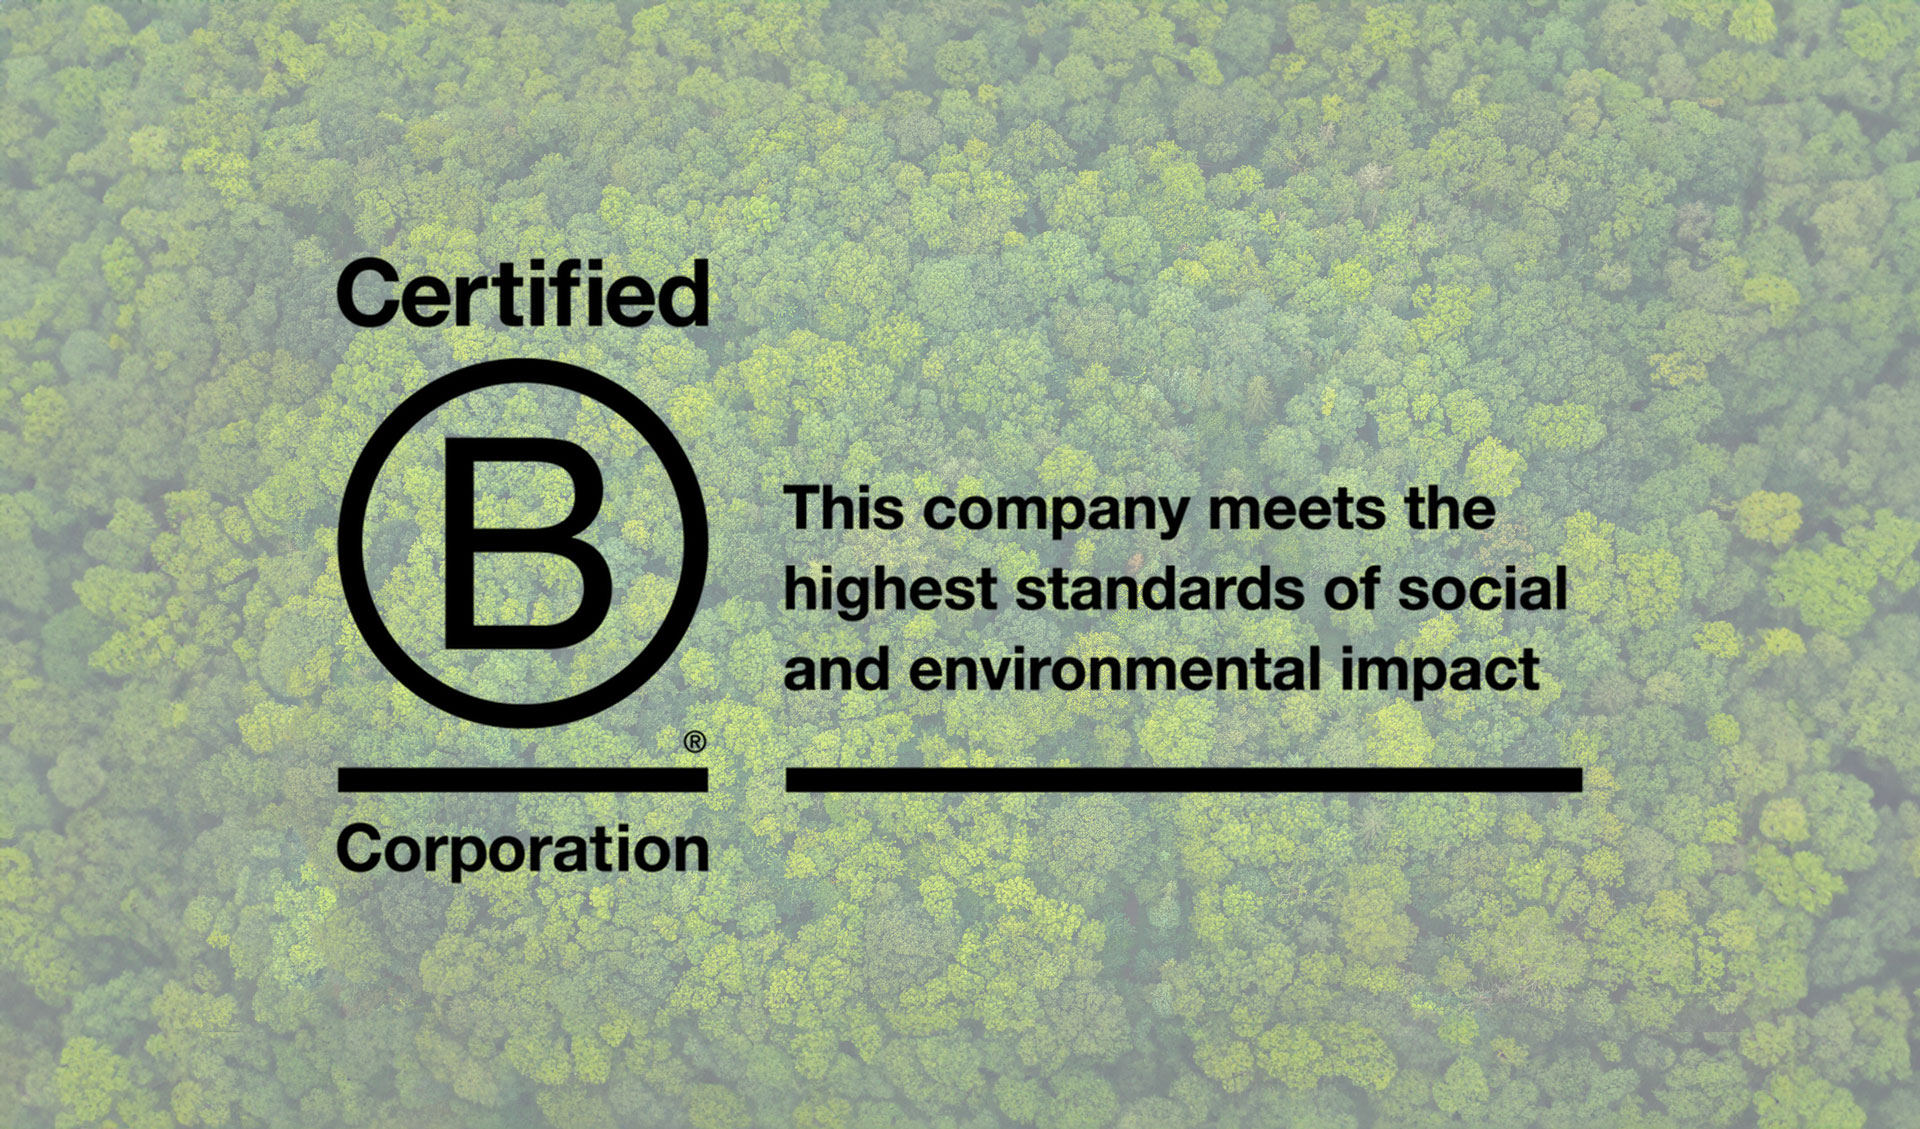 Wood for Good and why achieving B Corp status means so much featured image